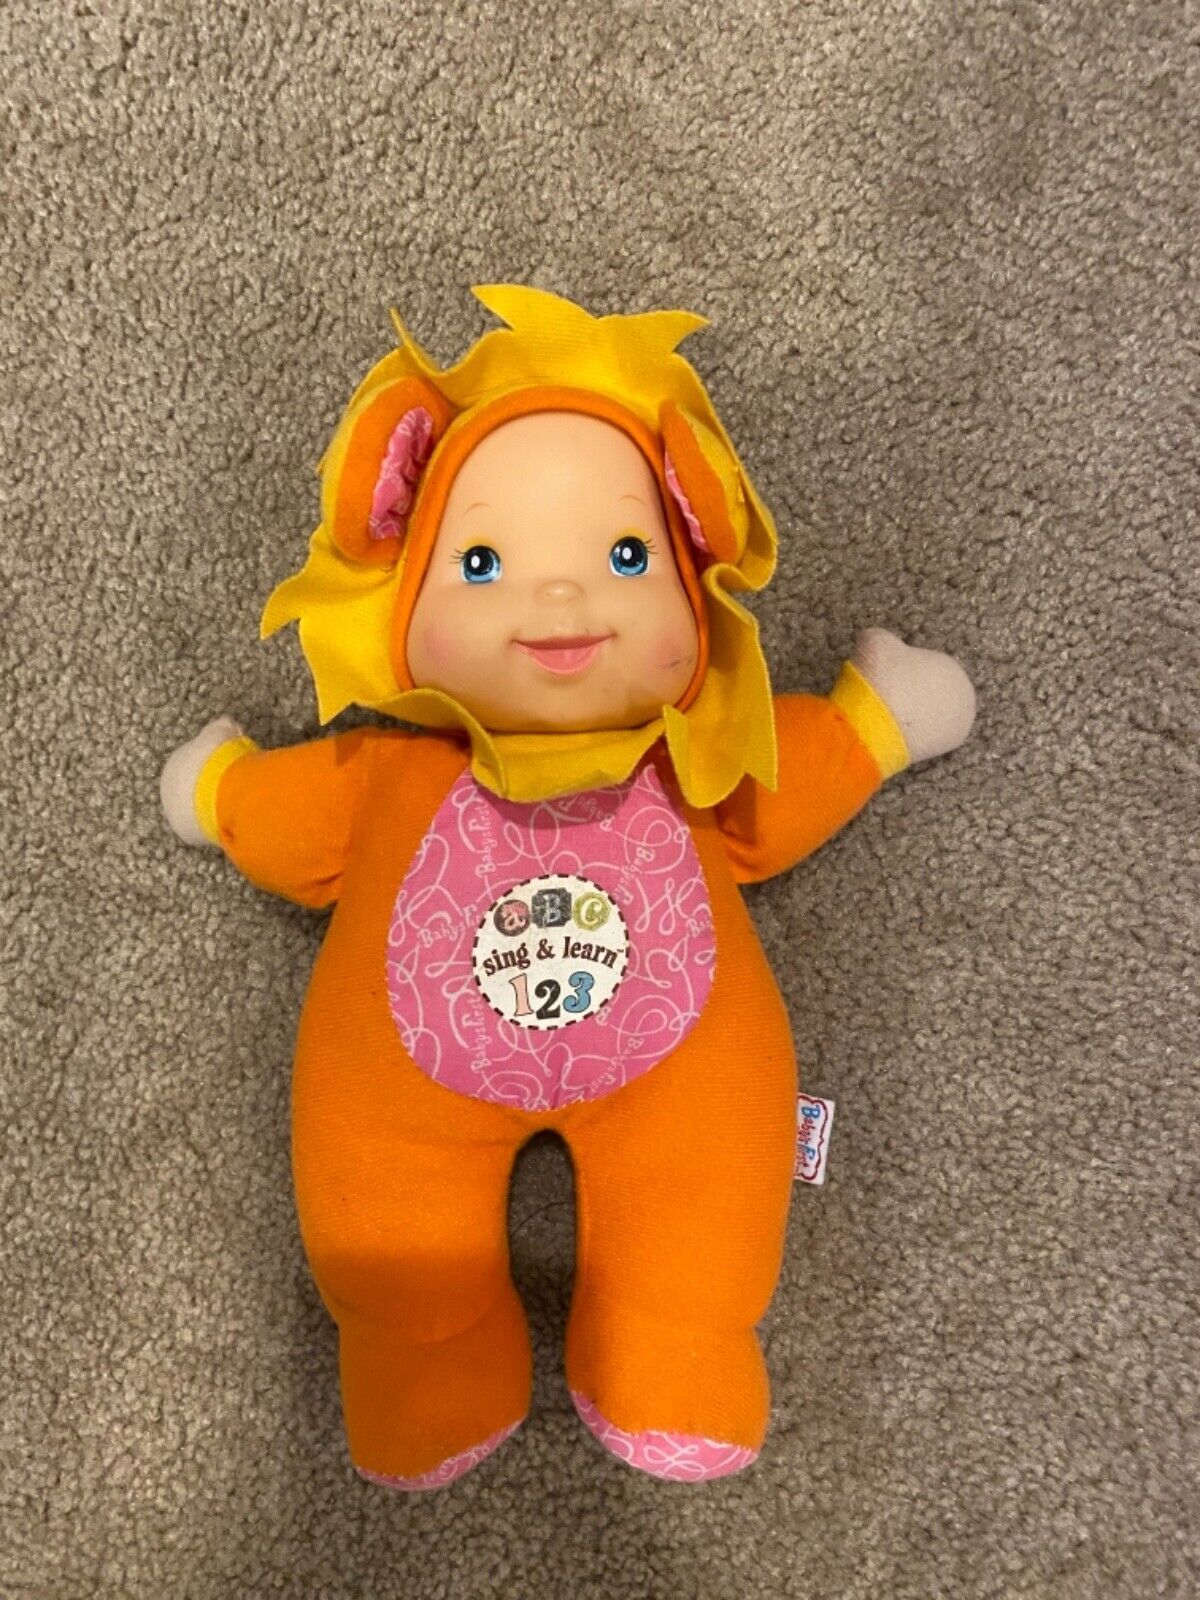 Baby's First Sing & Learn Doll in Sunflower Suit says ABC's 123's stuffed plush - $13.09